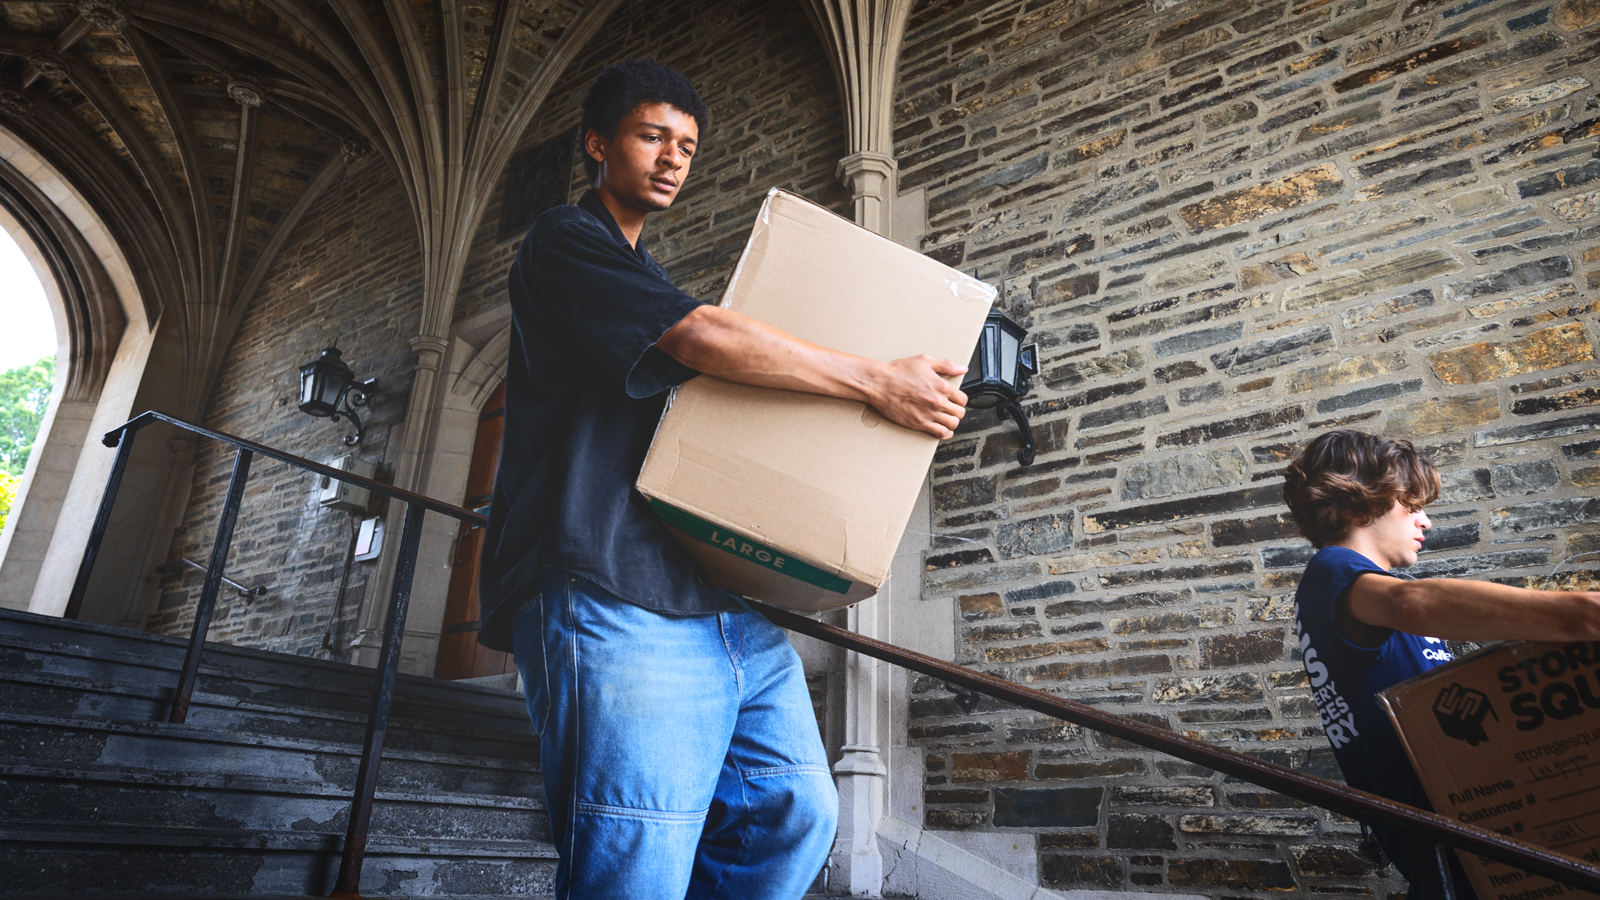 Two people carry large boxes down a flight of stairs at Cornell University.